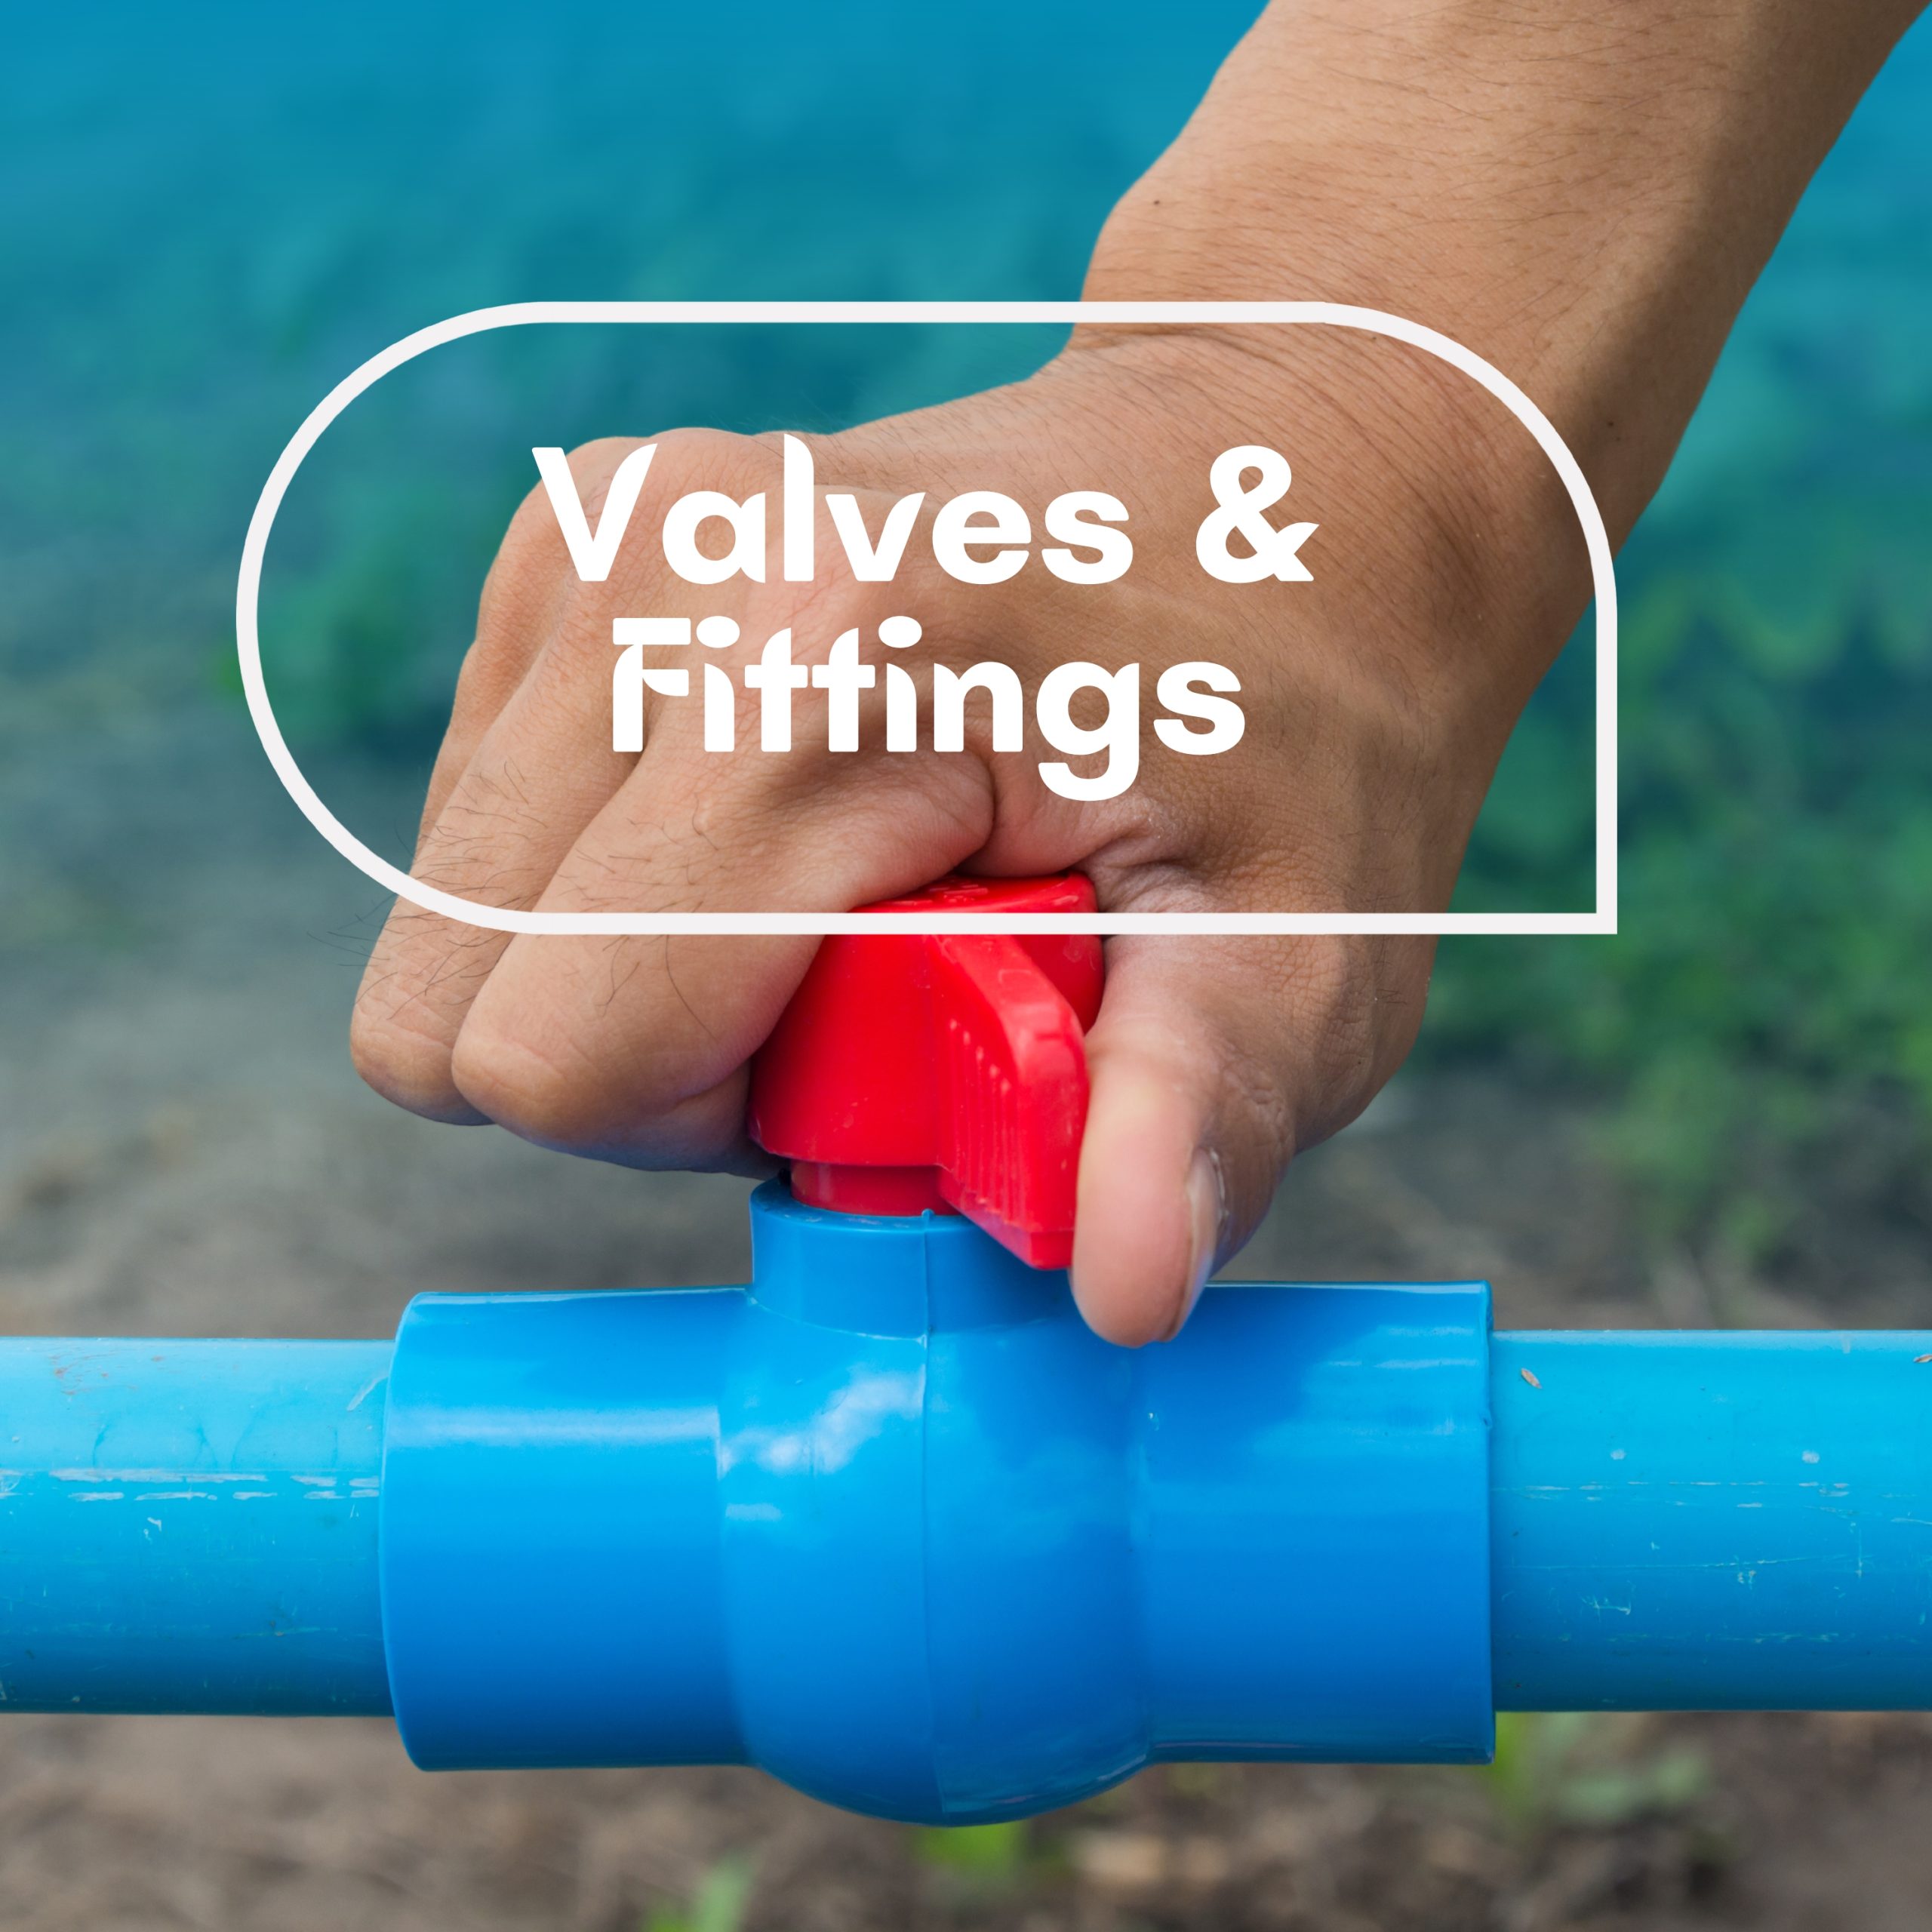 Valves and fittings